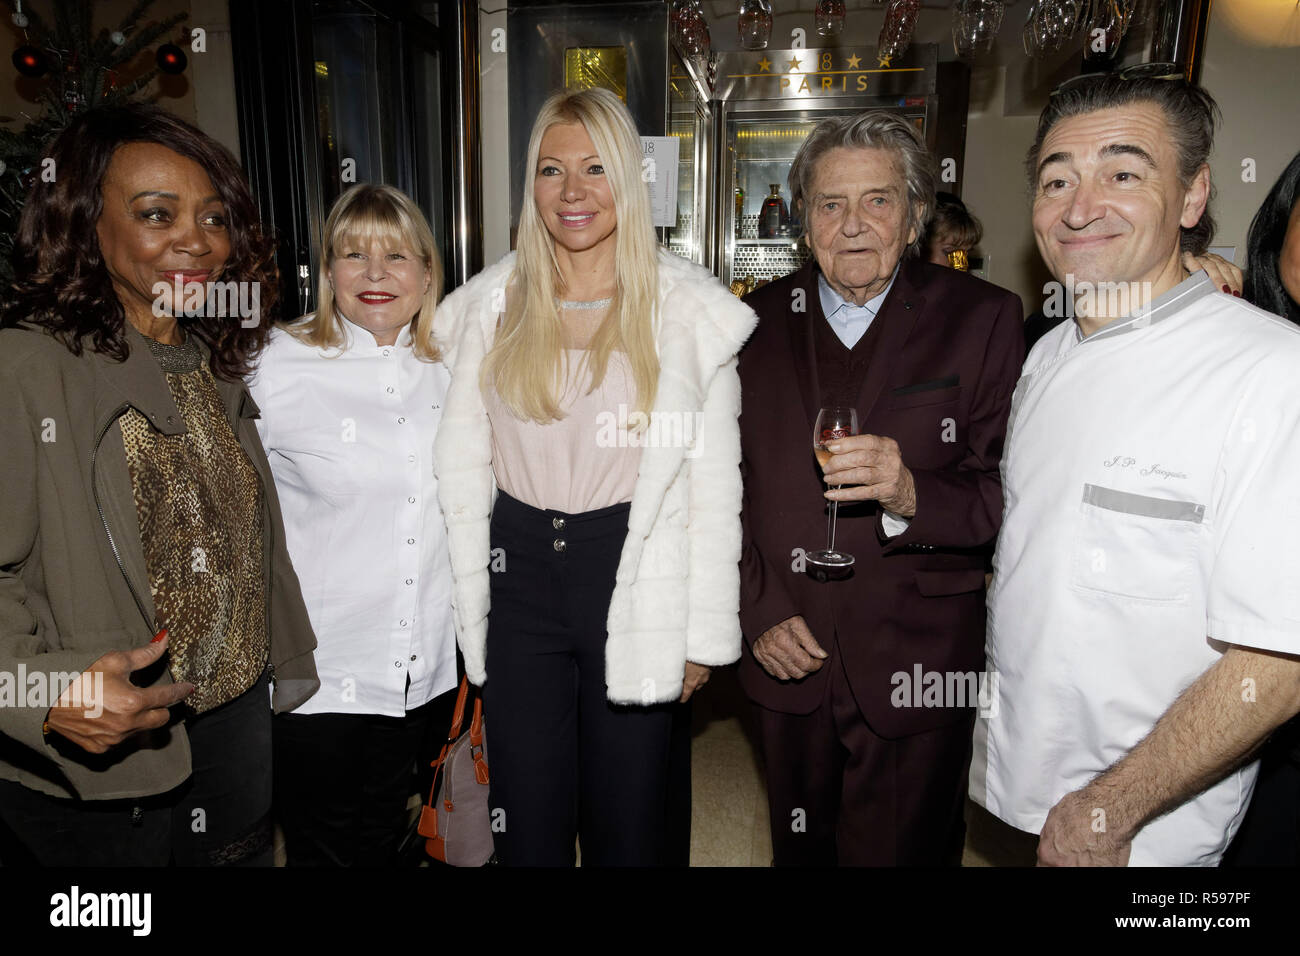 https://c8.alamy.com/comp/R597PF/paris-france-29th-nov-2018-chef-ghislaine-arabian-food-journalist-nadine-rodd-jean-pierre-mocky-and-chef-jean-pierre-jacquin-jean-eric-duluc-president-of-the-international-federation-of-tourism-awarded-the-2018-lauriers-dor-of-excellence-international-hotel-tourism-to-thomas-chaumette-of-best-western-hotel-le-18-paris-on-november-29-2018-credit-bernard-menigaultalamy-live-news-R597PF.jpg